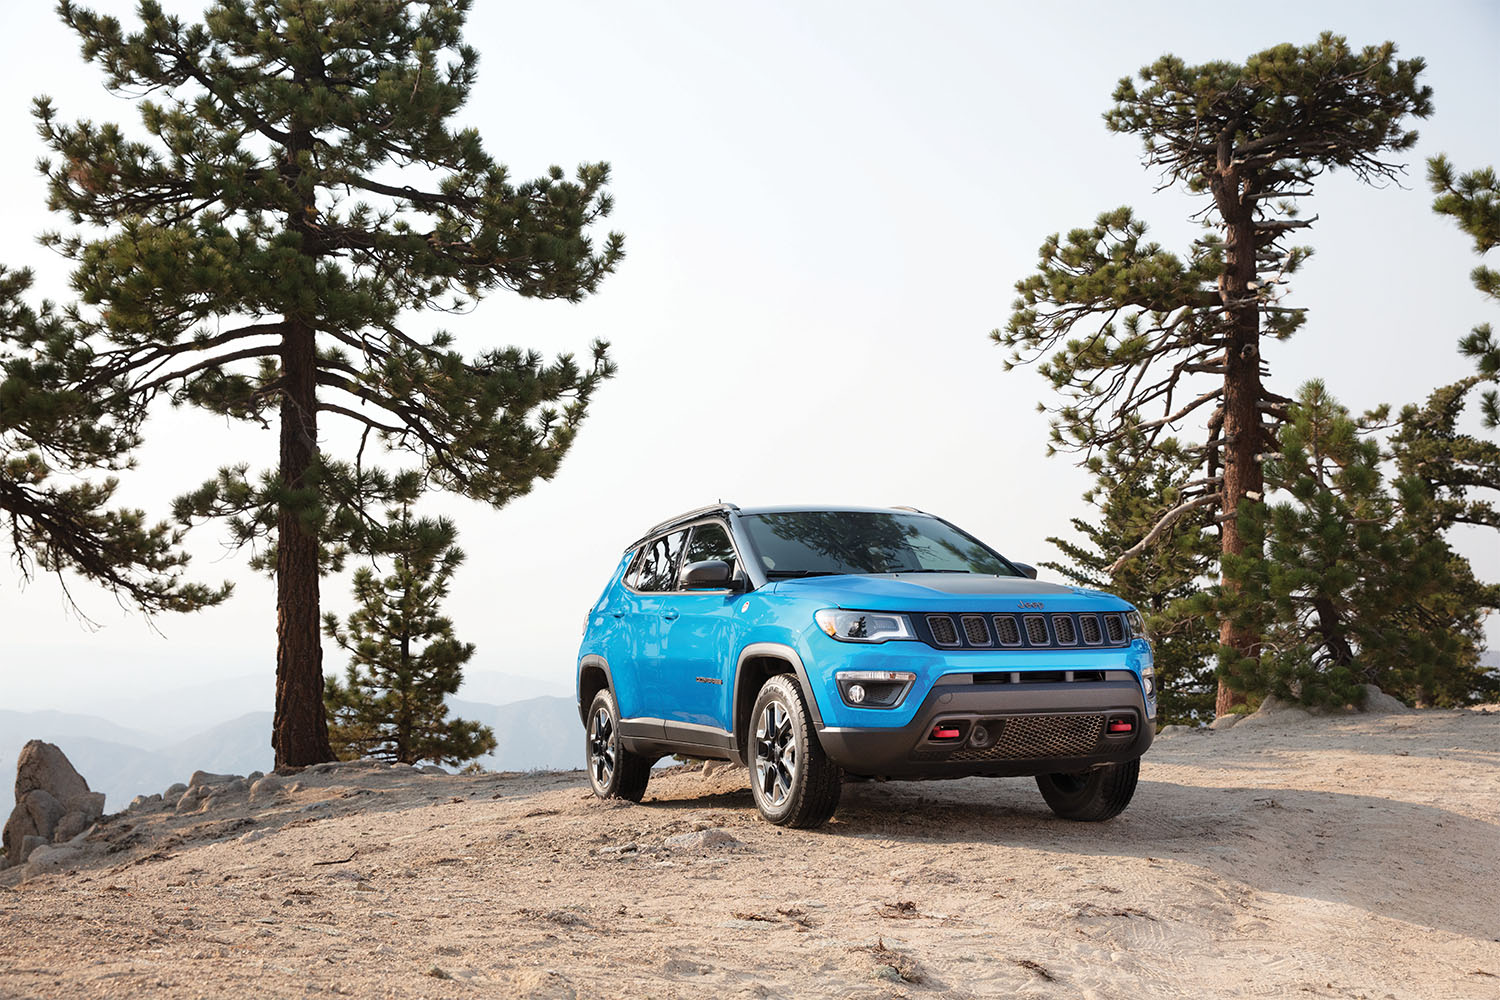 Jeep Compasss available in Ann Arbor, MI at Fox Hills Chrysler Jeep